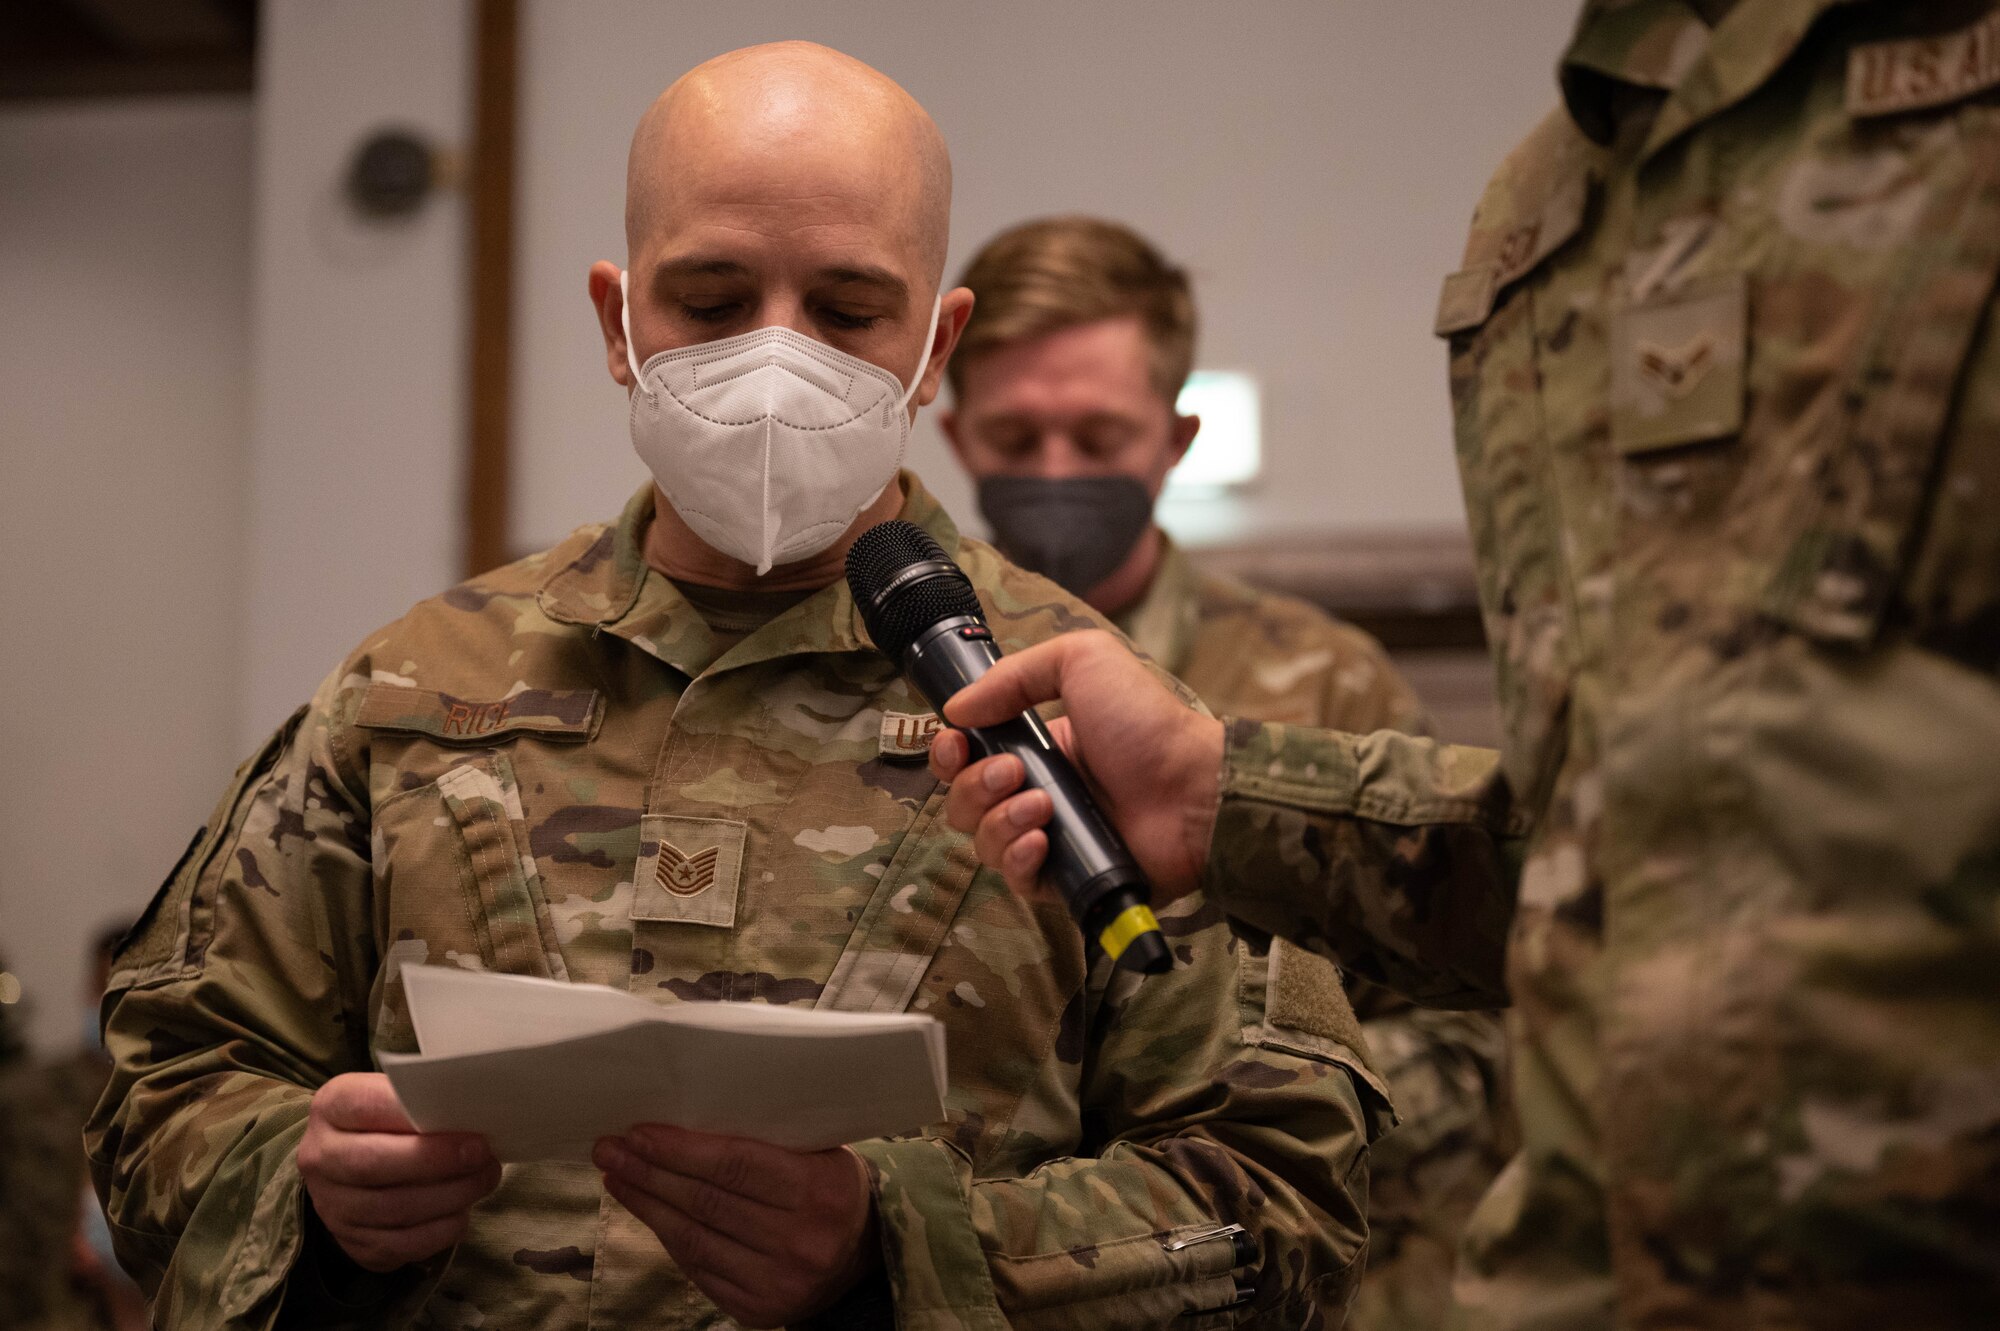 A military member speaking into a microphone.